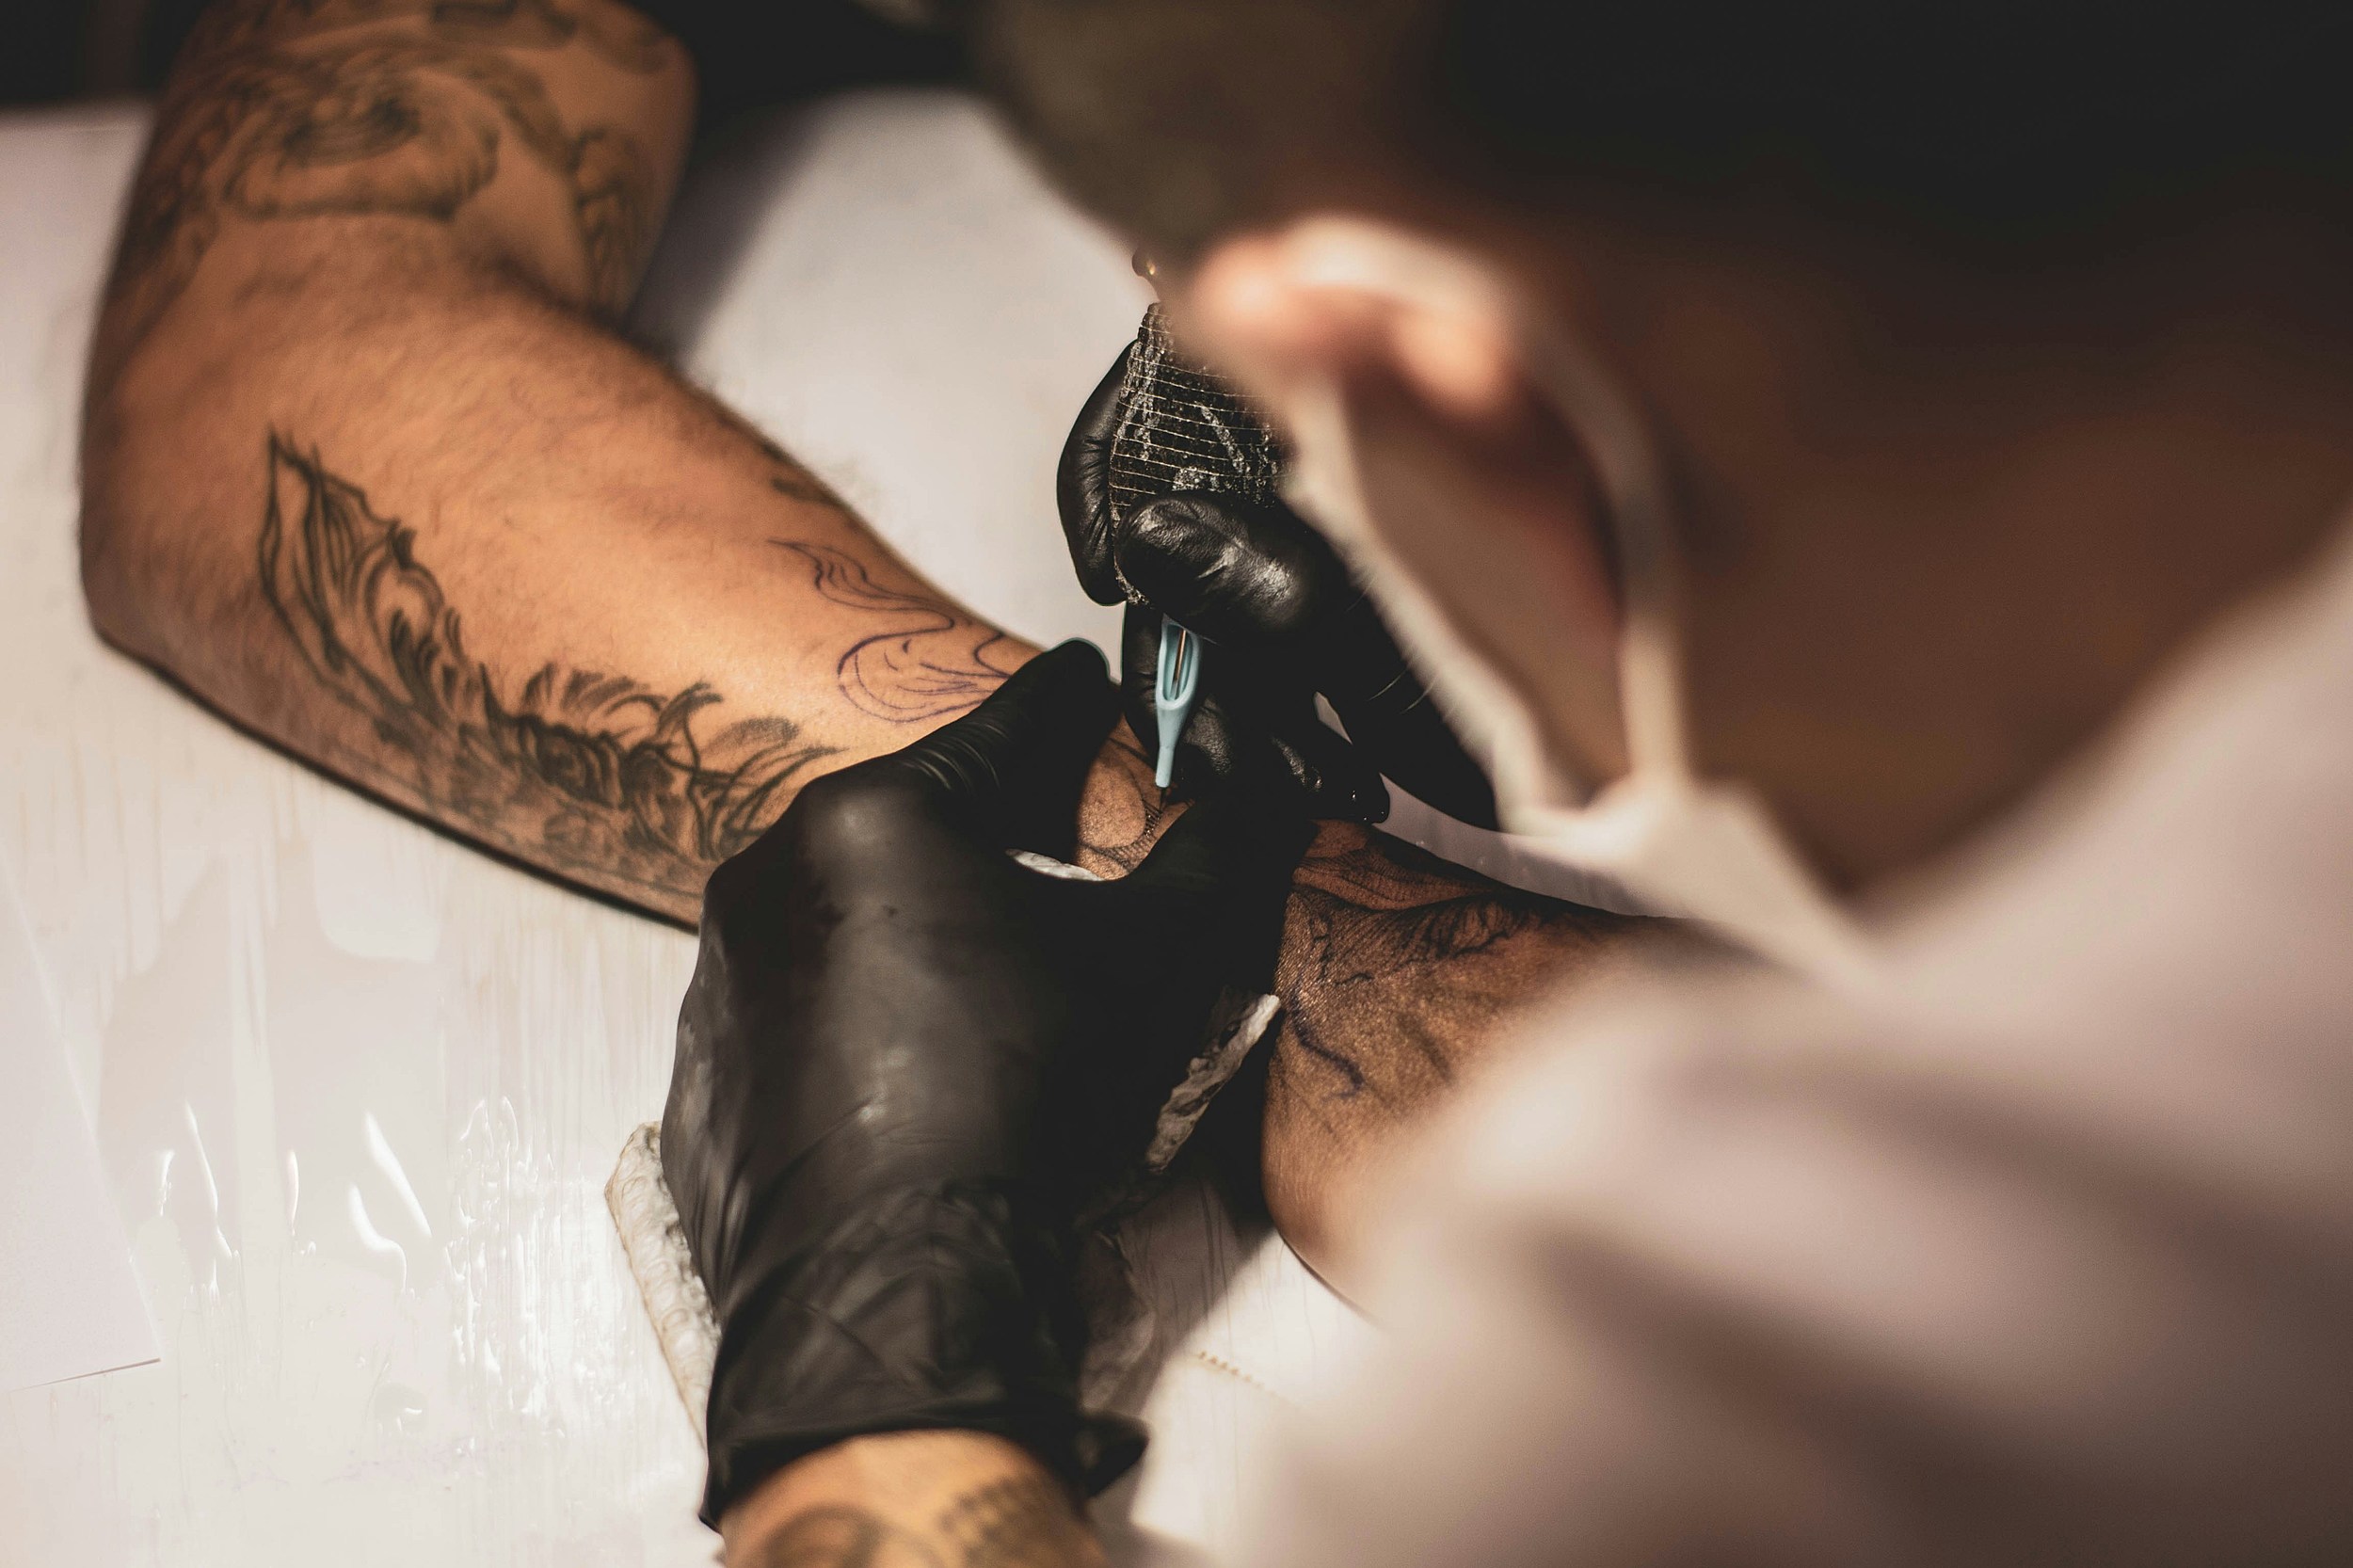 Tampa man opened first tattoo parlor in Las Vegas and San Fernando Valley